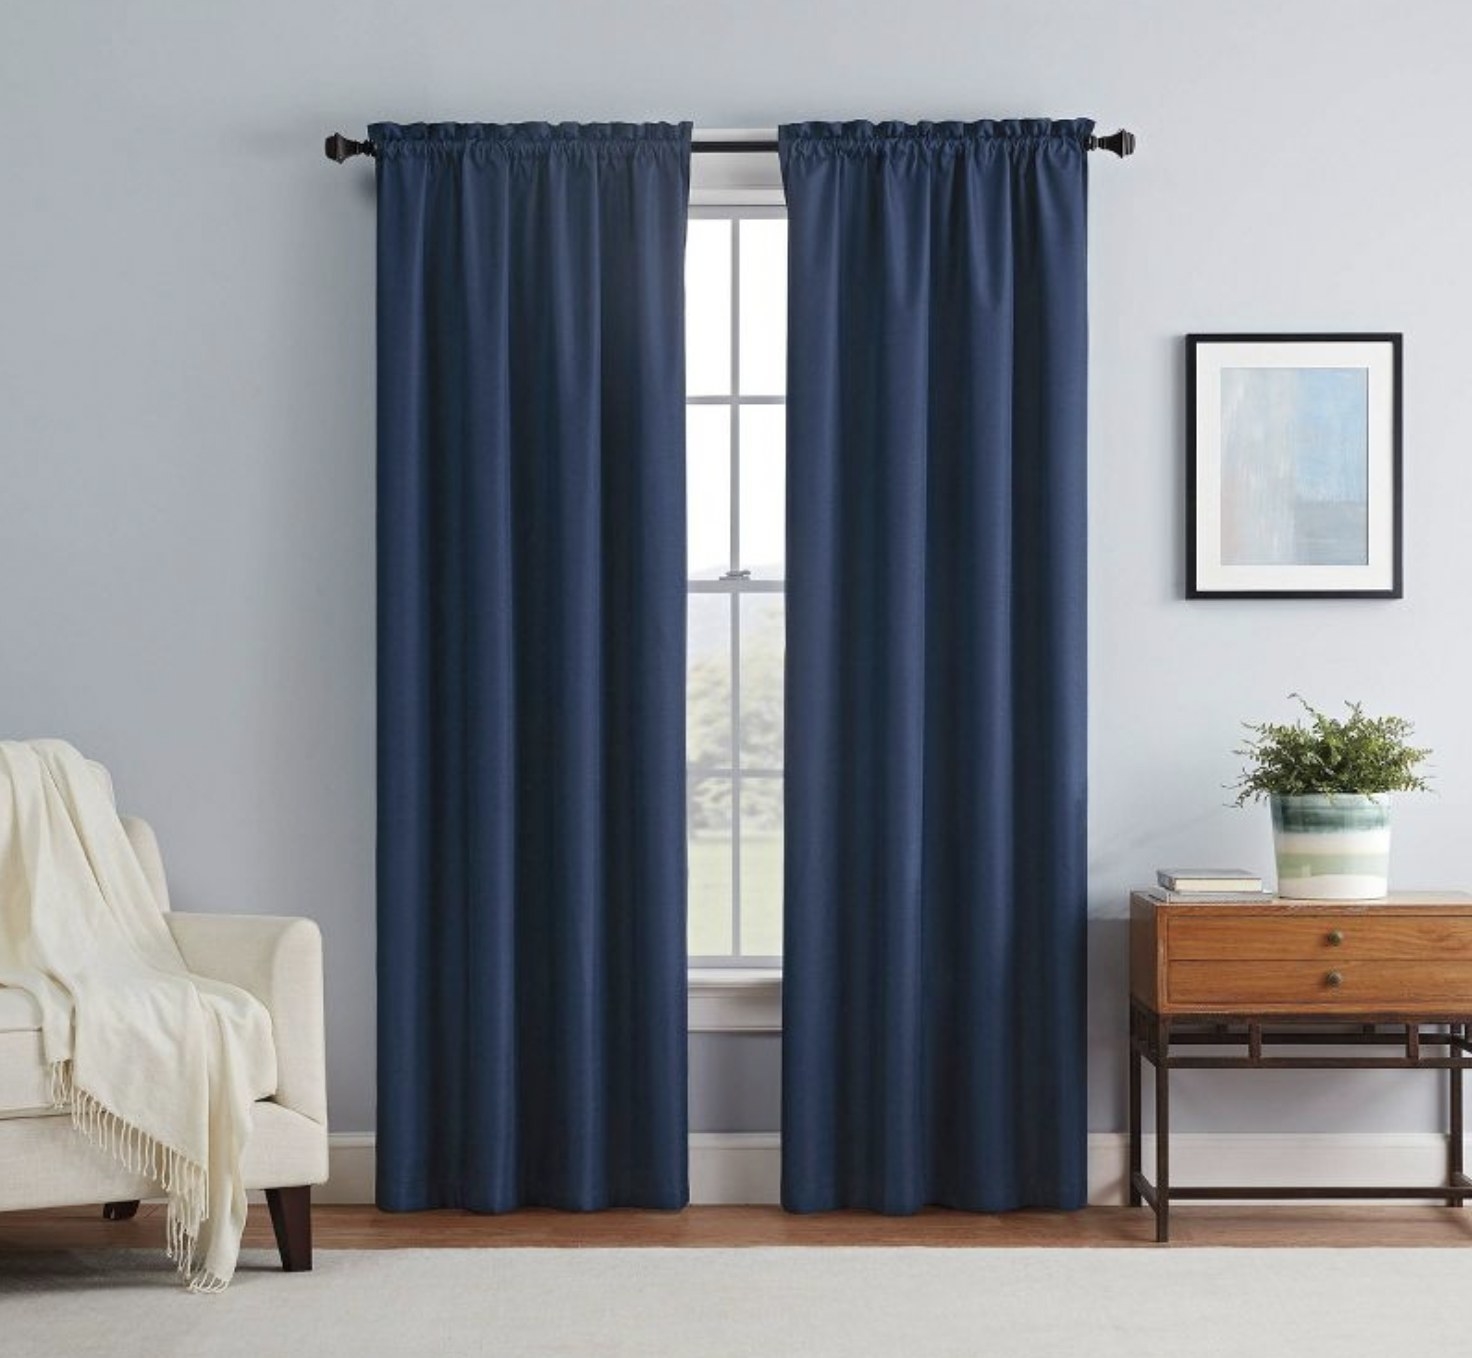 a pair of navy blue curtains hanging over a window